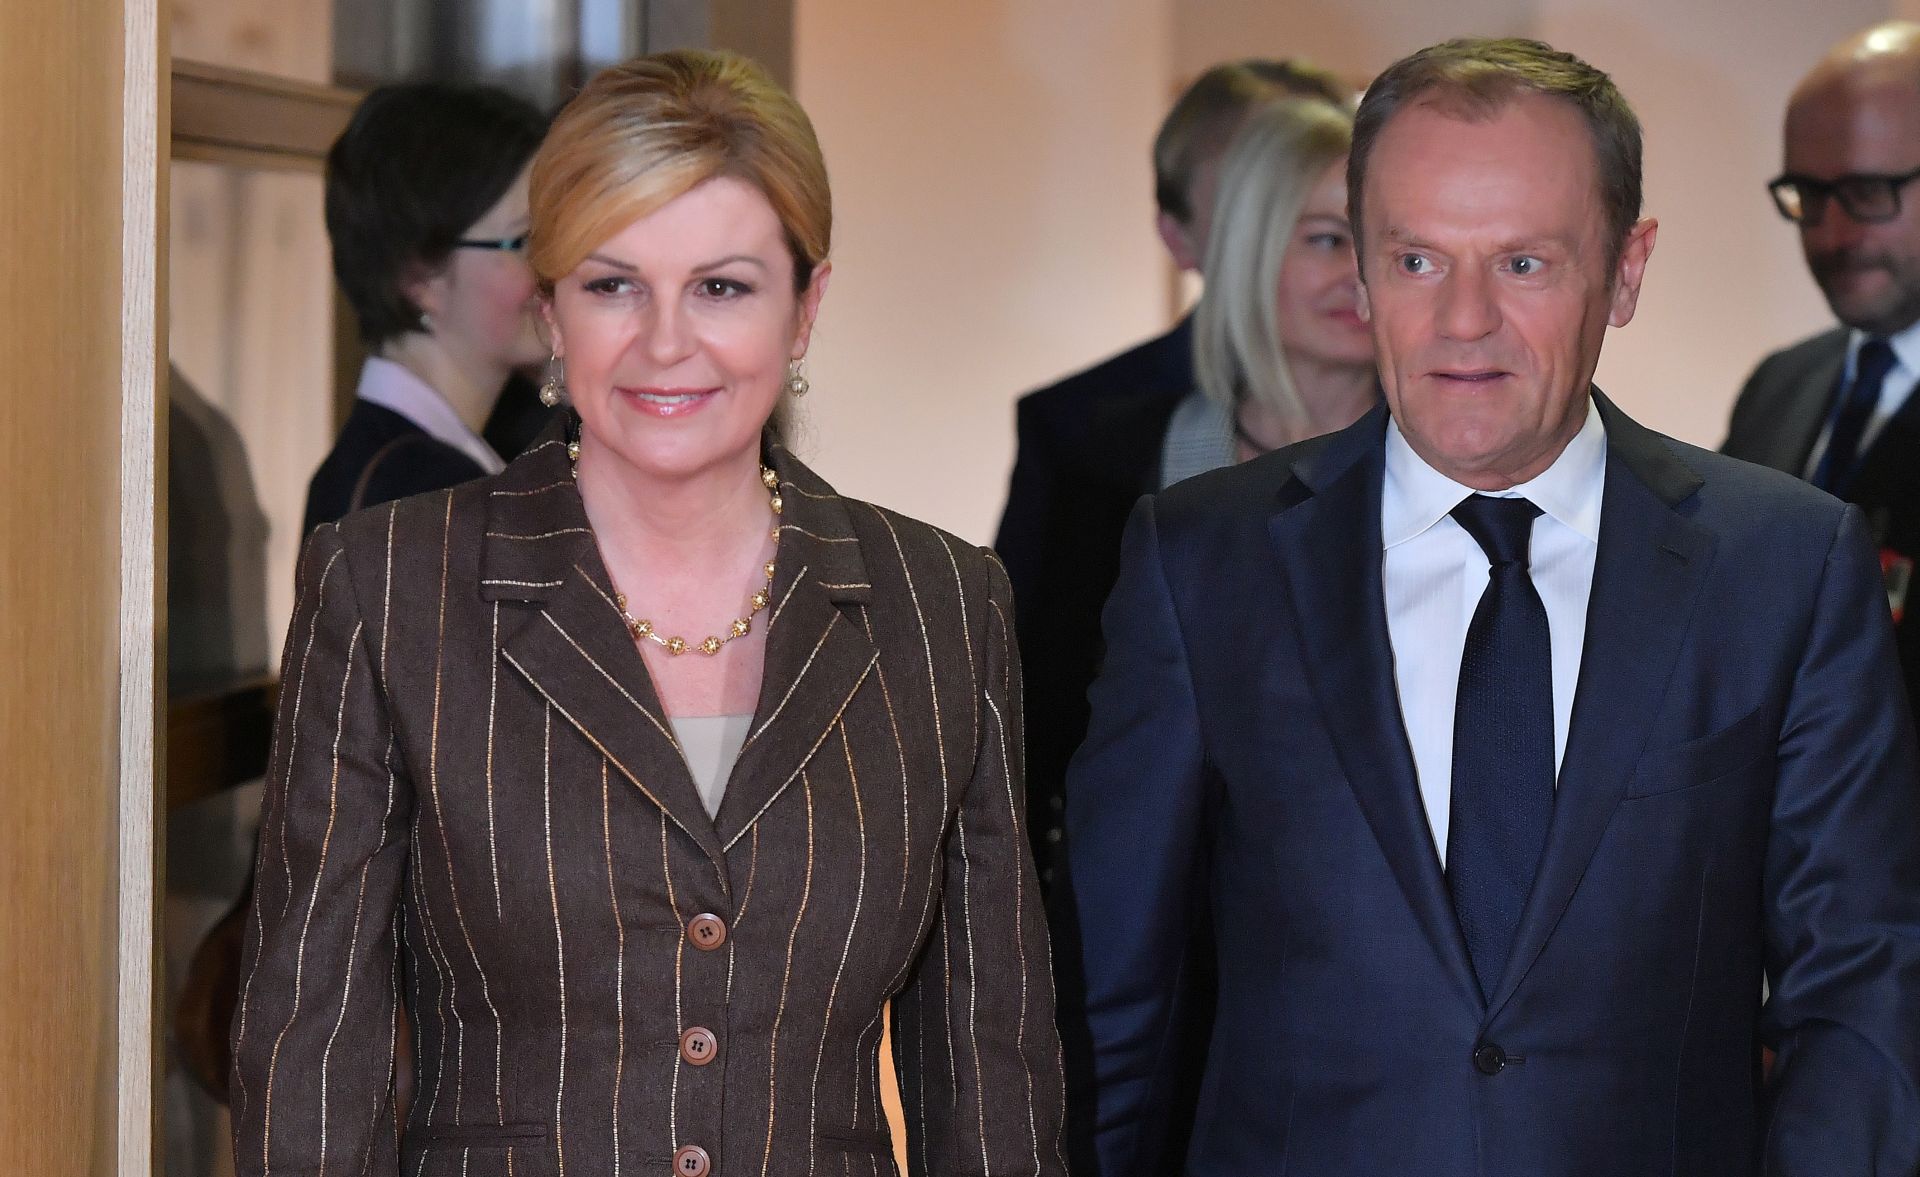 epa07419129 Croatian President Kolinda Grabar Kitarovic (L) is welcomed by President of the European Council Donald Tusk (R) prior to a meeting in Brussels, Belgium, 07 March 2019.  EPA/EMMANUEL DUNAND / POOL